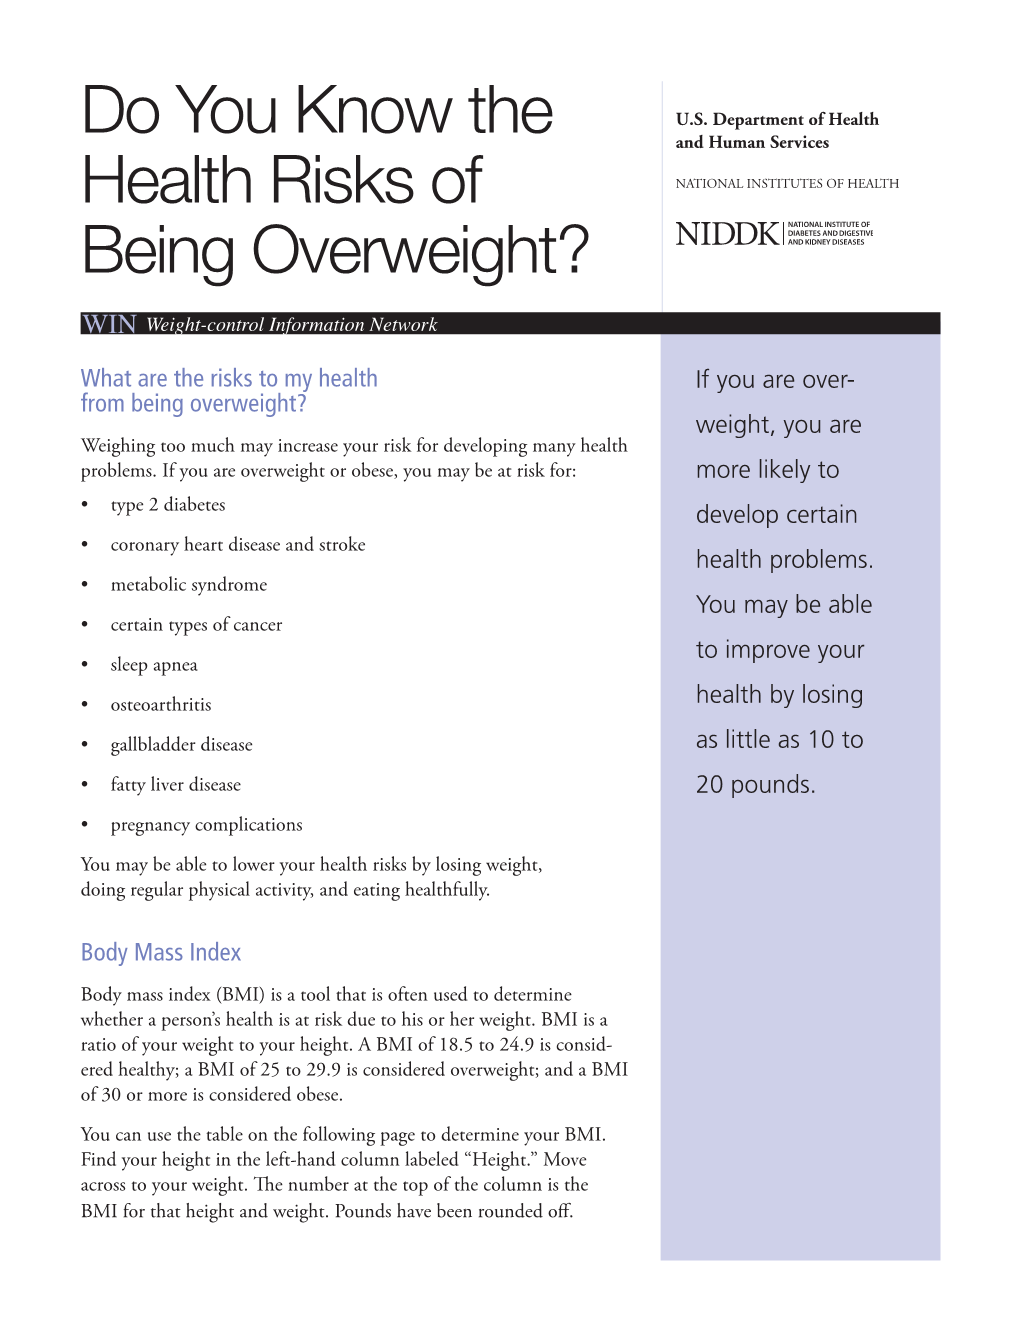 Do You Know the Health Risks of Being Overweight?